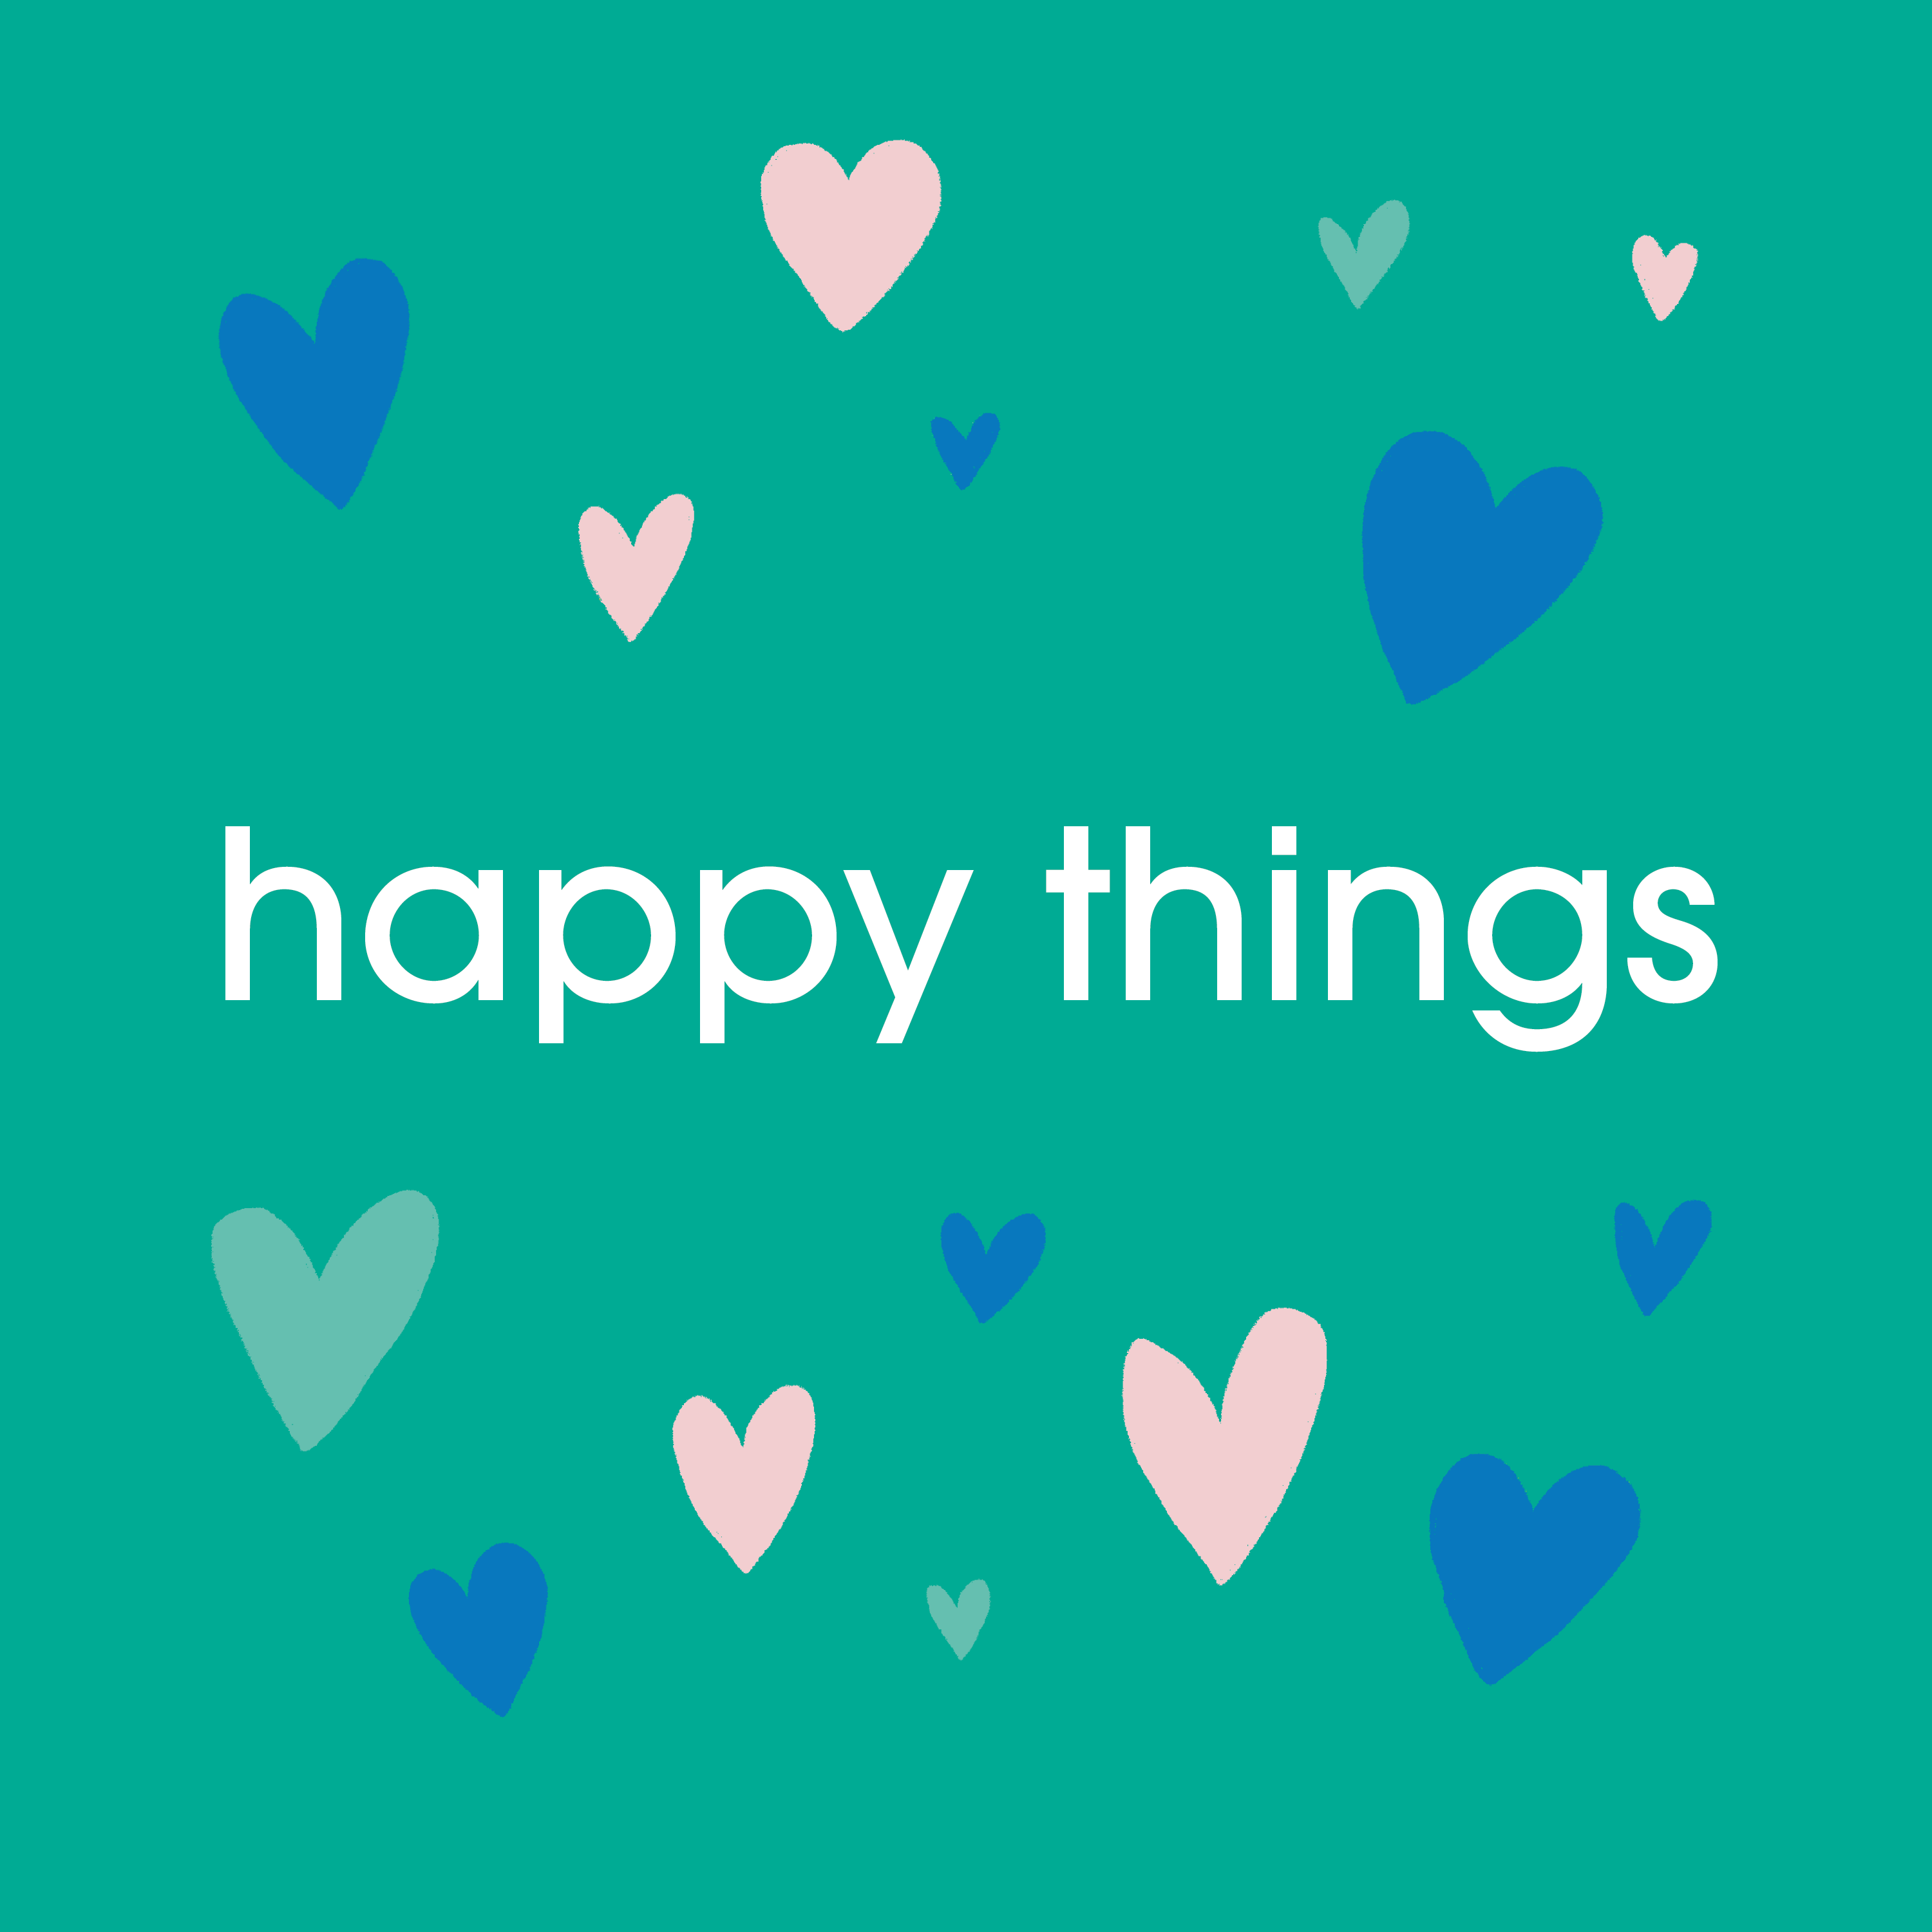 (more) happy things